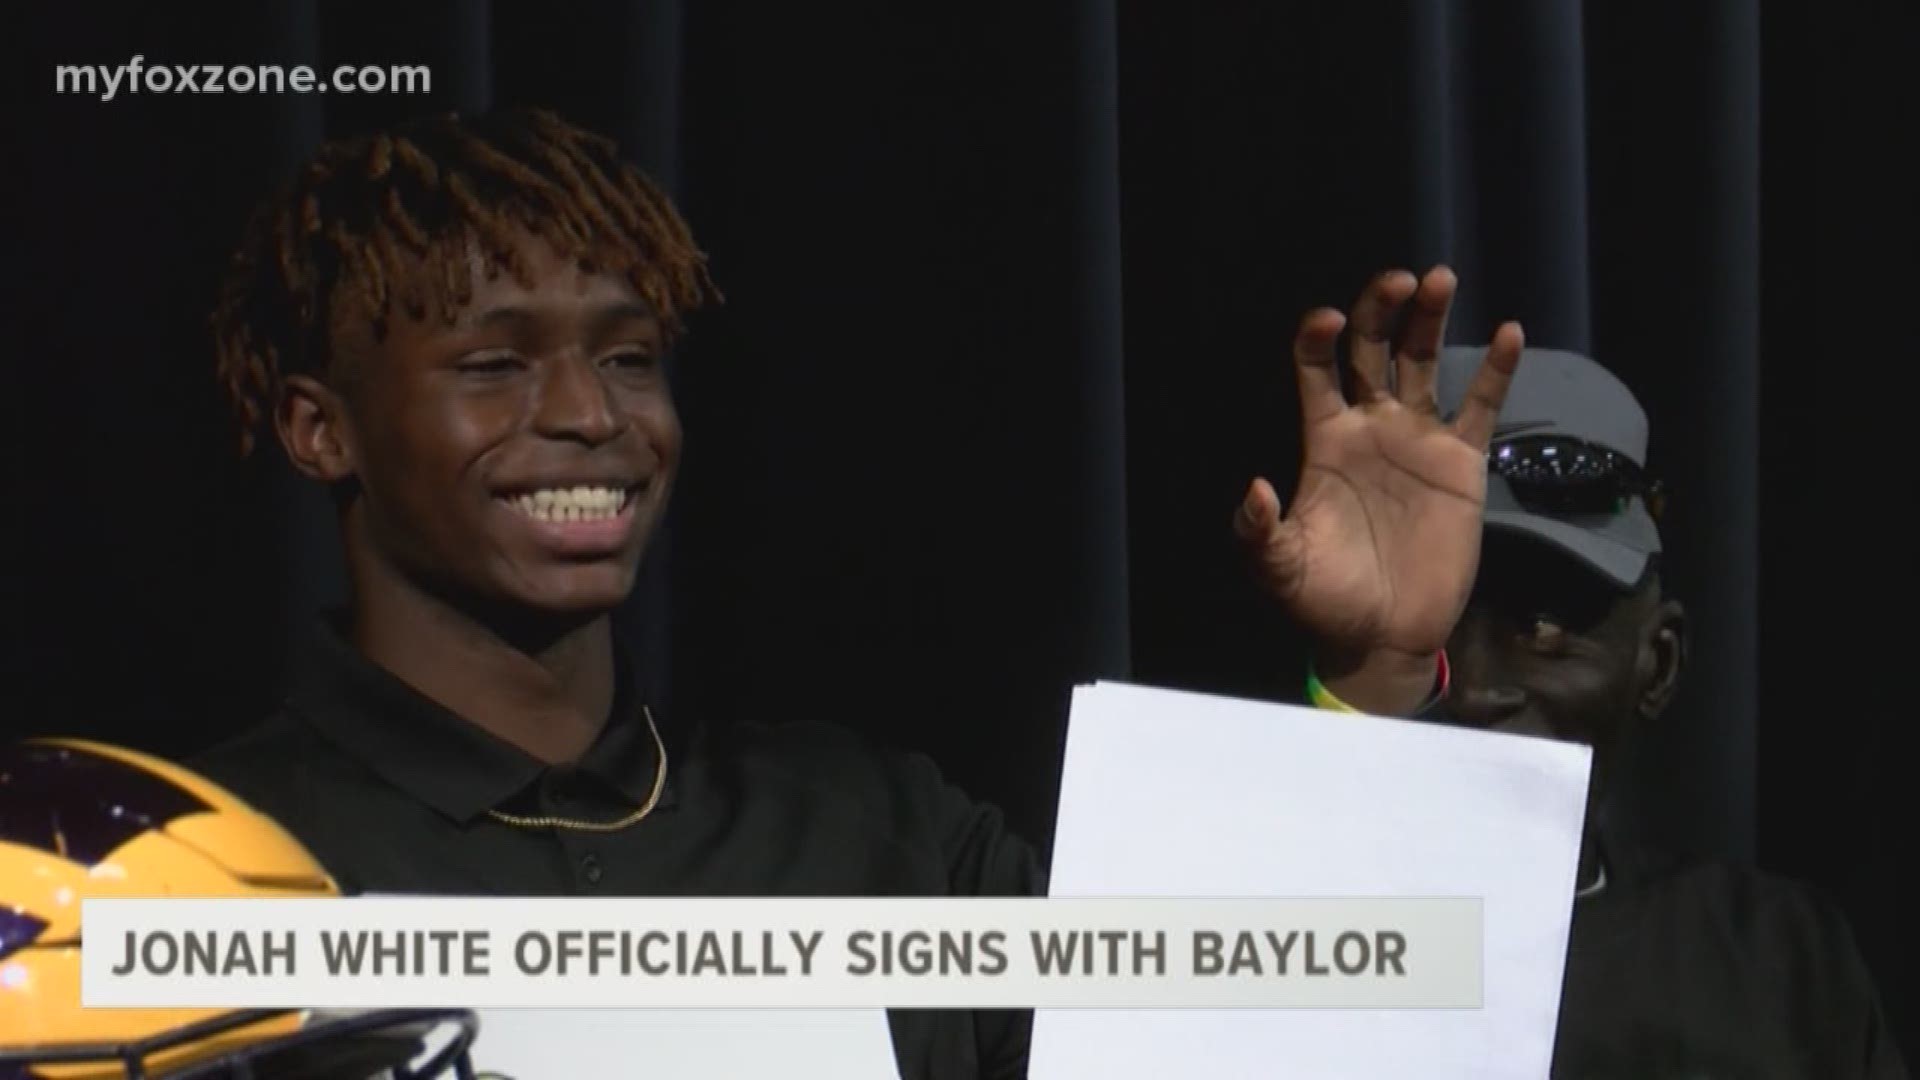 From Merkel's Mr. Do-It-All now to future Baylor Bear, Jonah White officially signed to with Baylor.